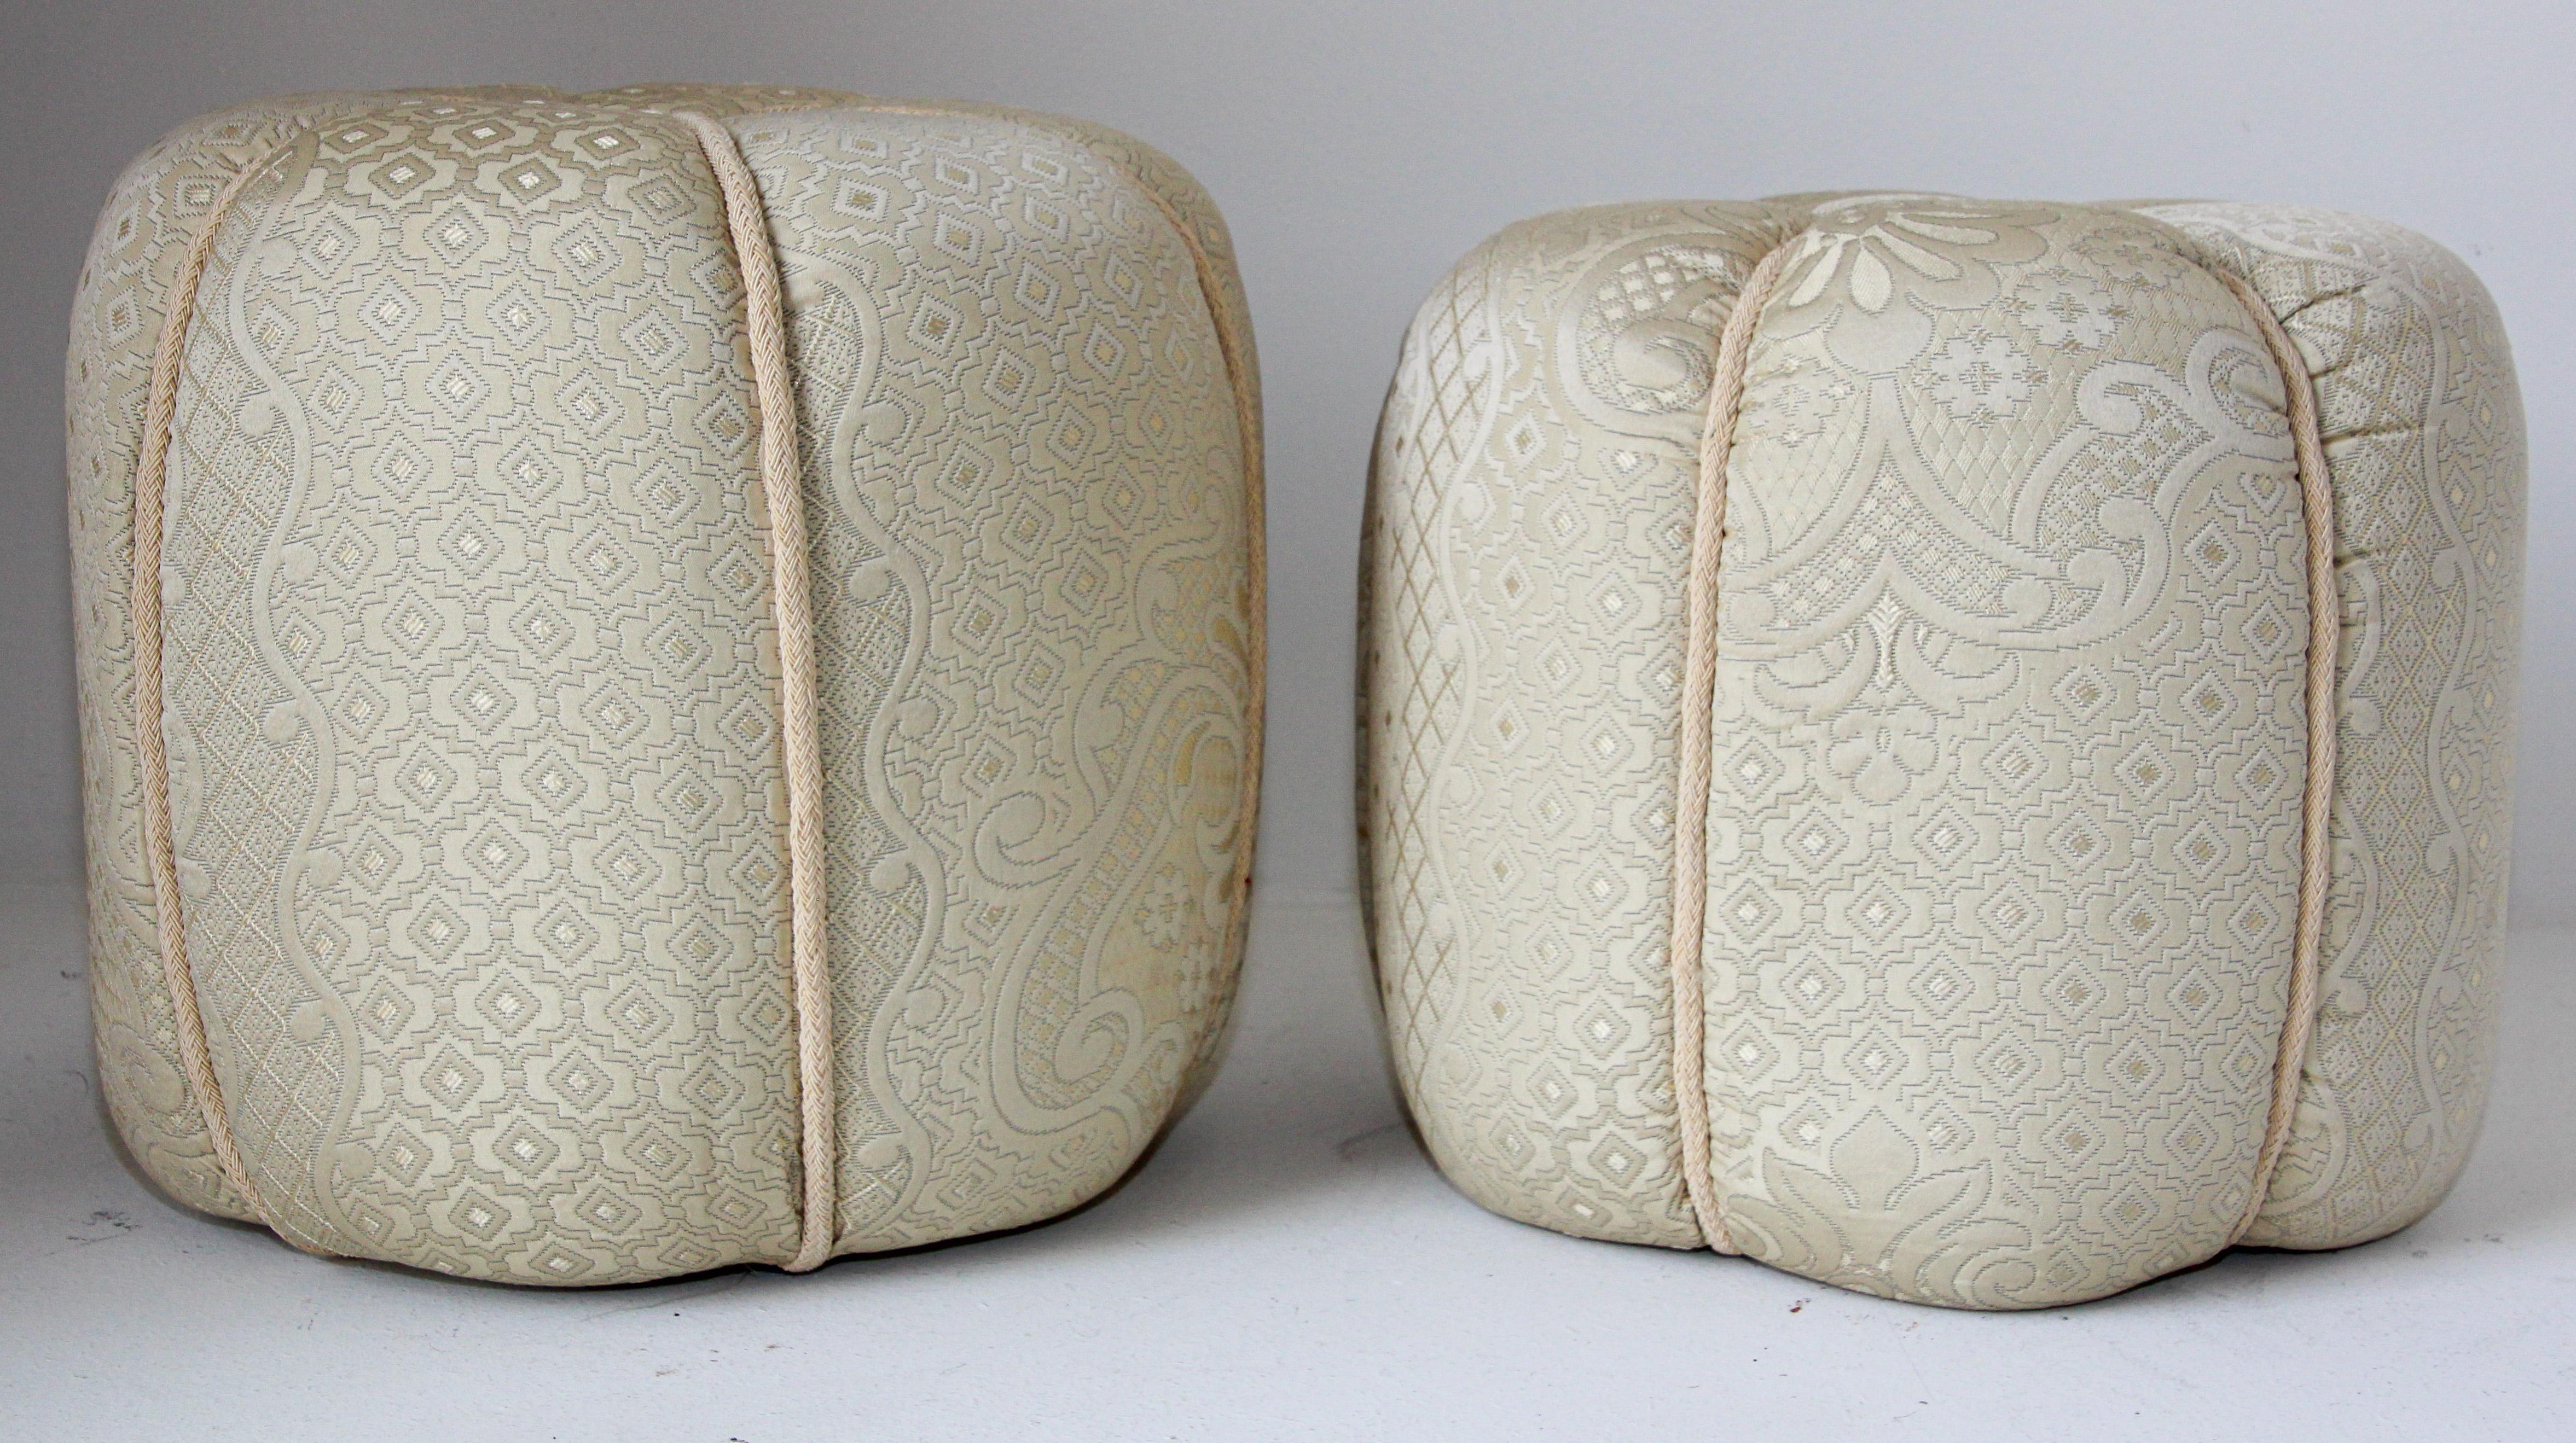 Pair of round Moroccan stools in white fabric upholstery Art Deco Style.
Art Deco style little pouf hassock, upholstered footstool circular ottoman.
This versatile accent piece, pouf is designed primarily for seating but can be used as both seating